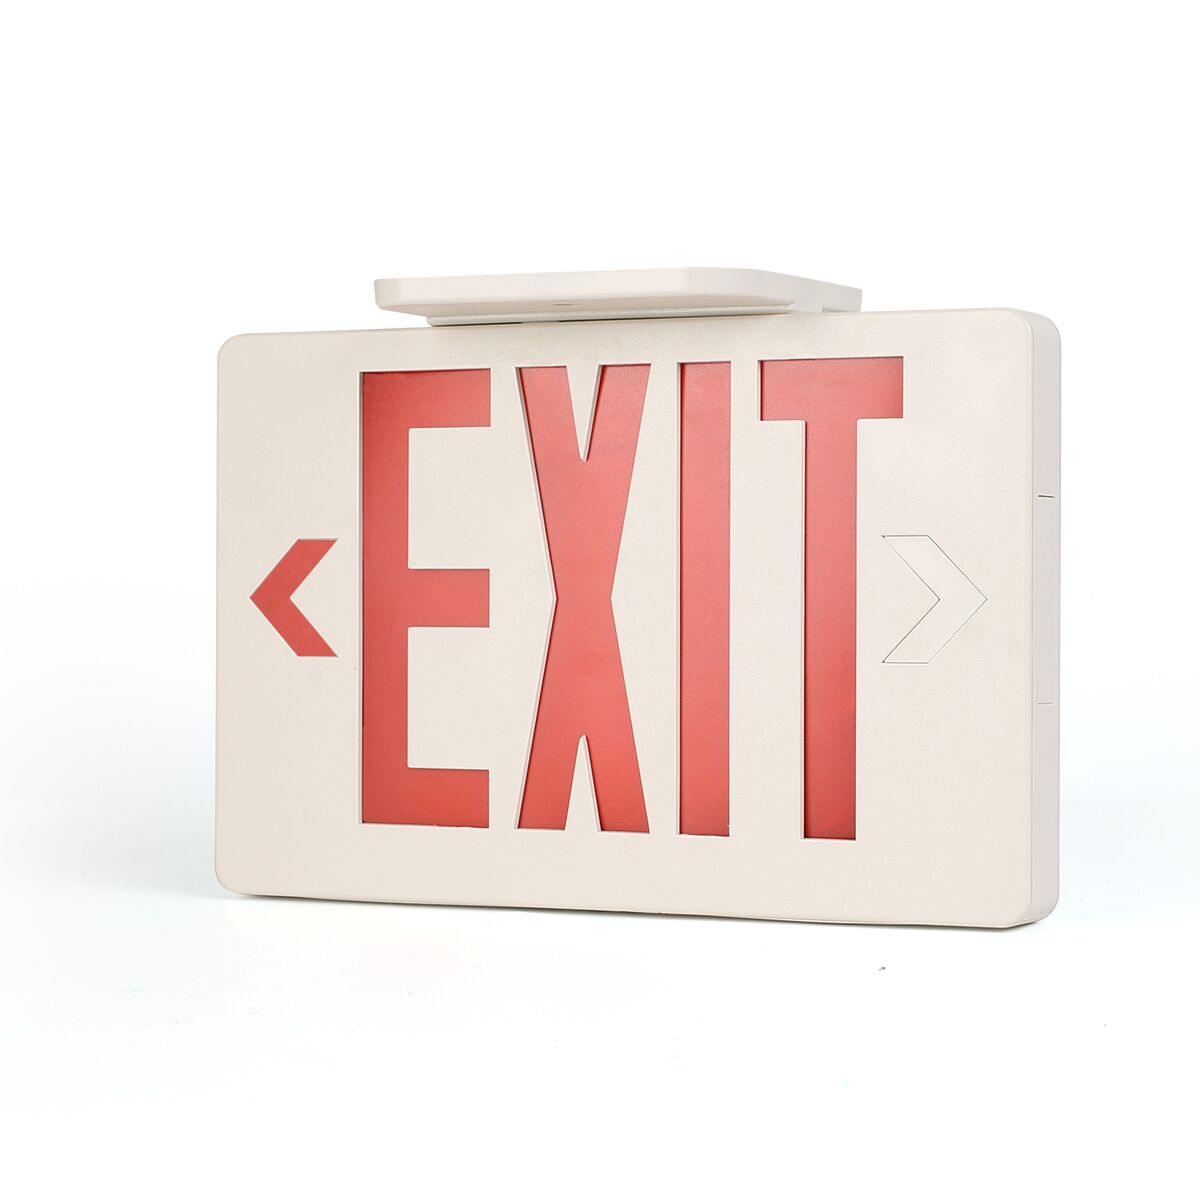 https://static.lepro.com/media/catalog/category/red-led-exit-sign-with-arrow.jpg